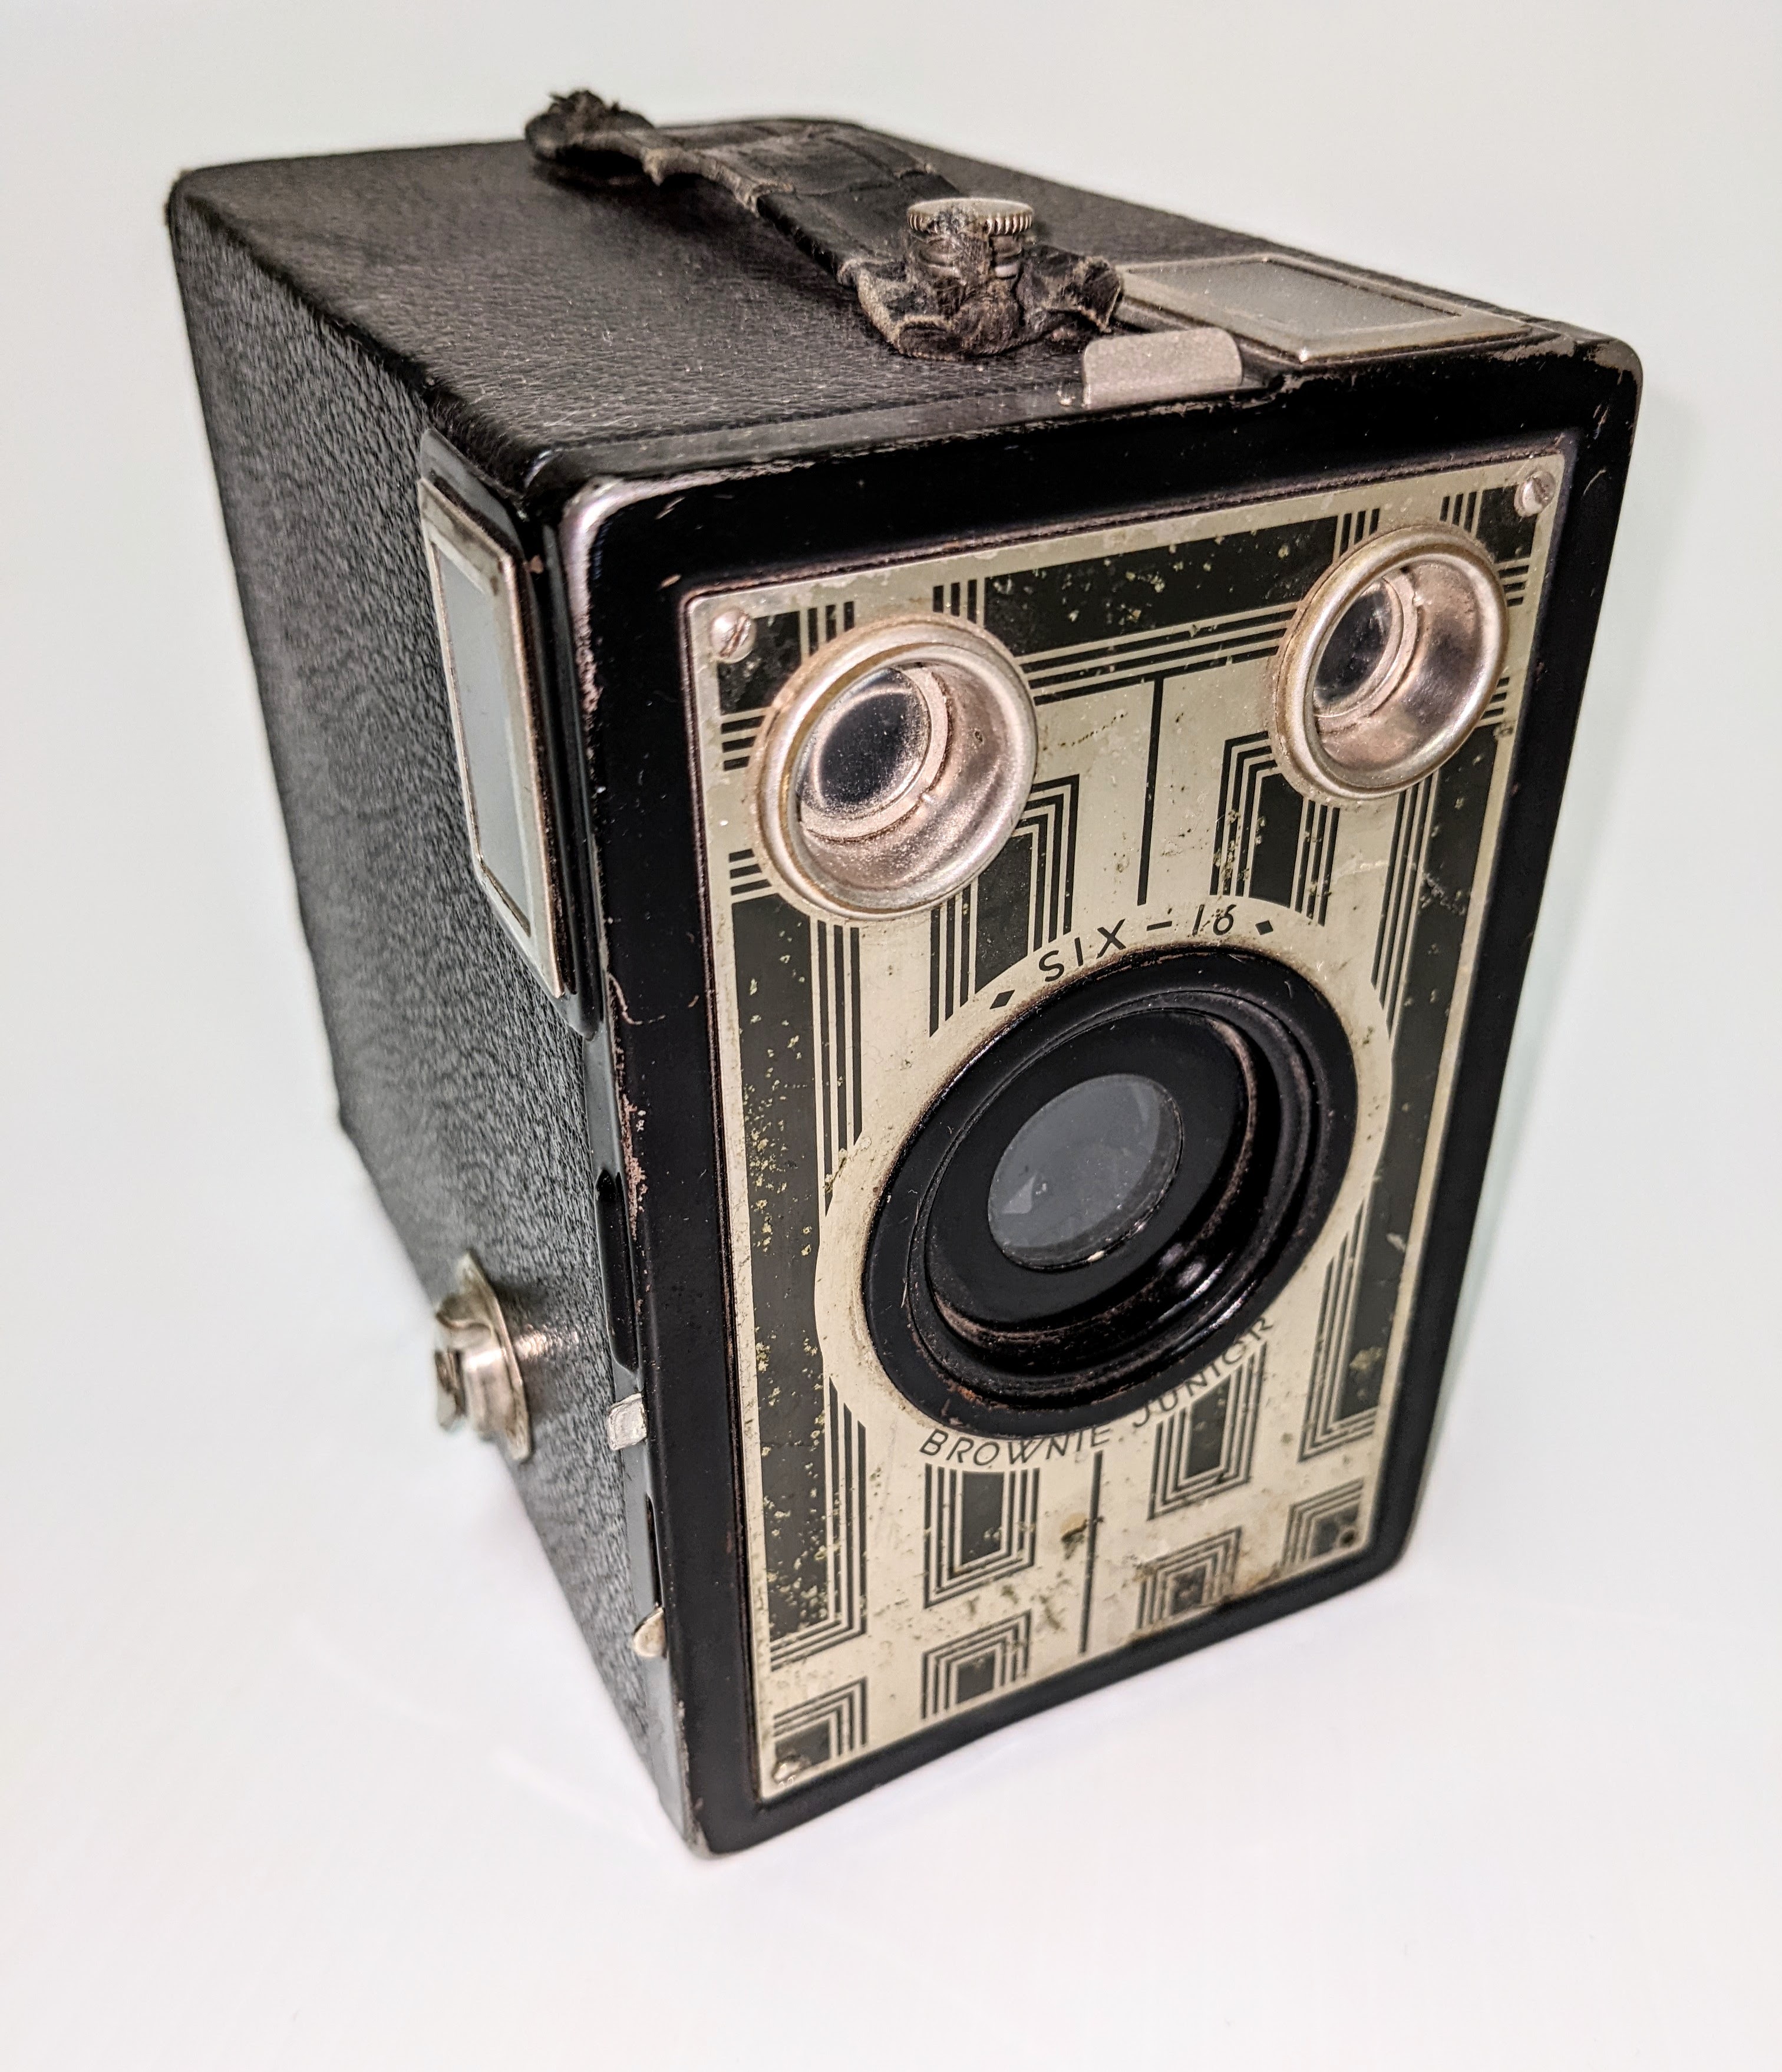 In 1936, when Rachel Ehrman (then Boire) was 9 years old, her brother Charles gave her this Six-16 Brownie Junior Camera. This type of camera was very popular and produced by the Kodak company from 1934 - 1942, and retailed for $2.75 - which is equivalent to about $55 today. This may not seem like much, but, considering this was in the midst of the great Depression - when the average annual wage earned in Canada was $896 - this was a prized possession; one that She treasured for the rest of her life.
10/01/2022
2010.95.05 / Erhman, Rachel Boire